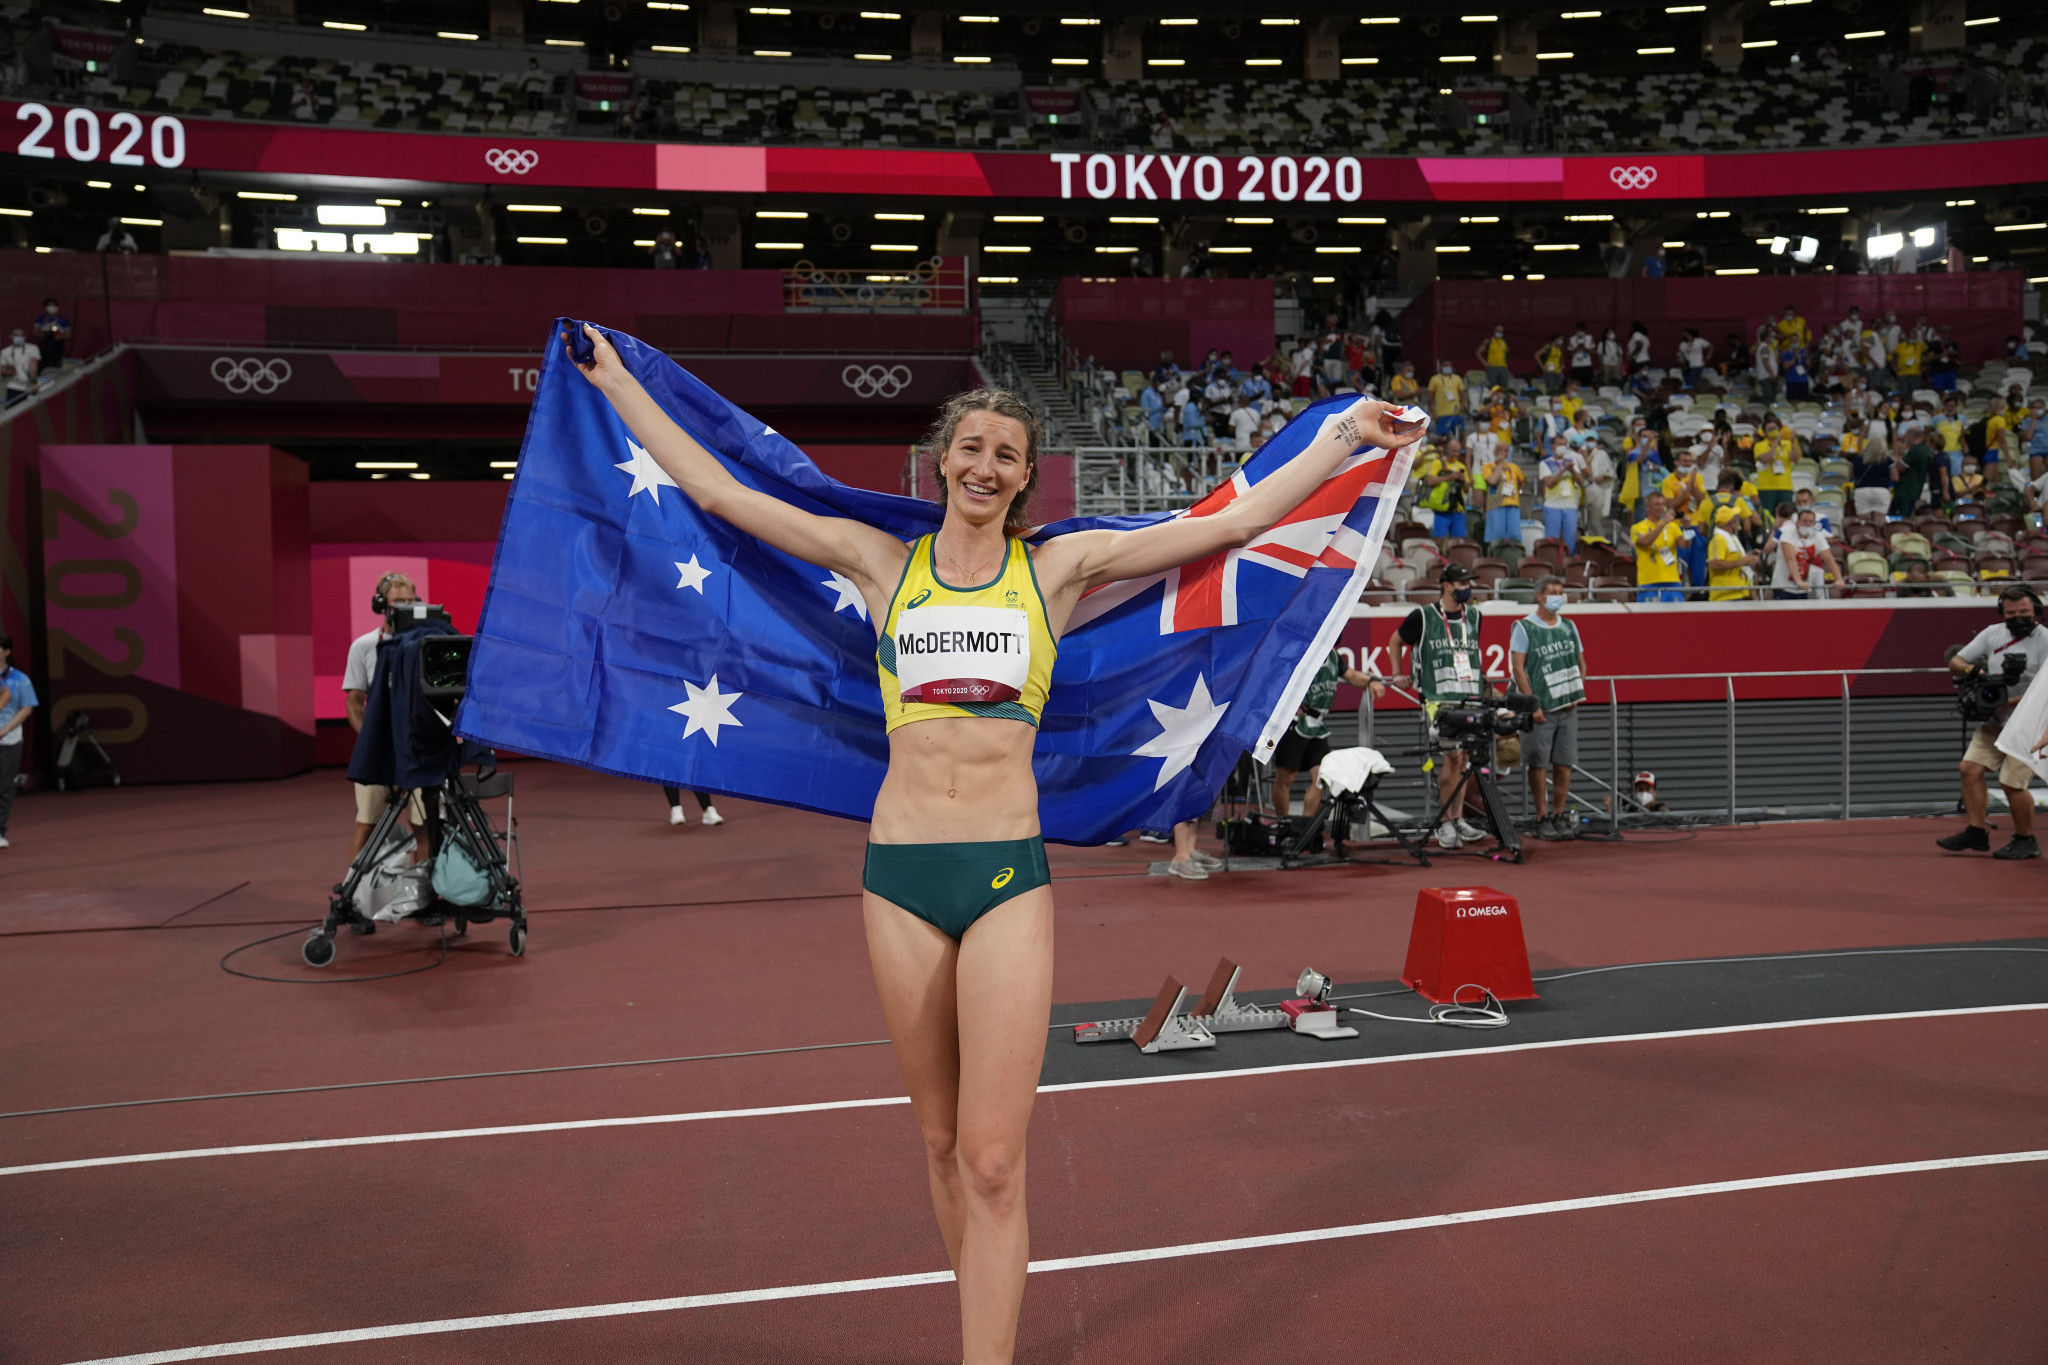 The programme aims to find Australia's Olympic and Paralympic medallists for Brisbane 2032 ©Getty Images